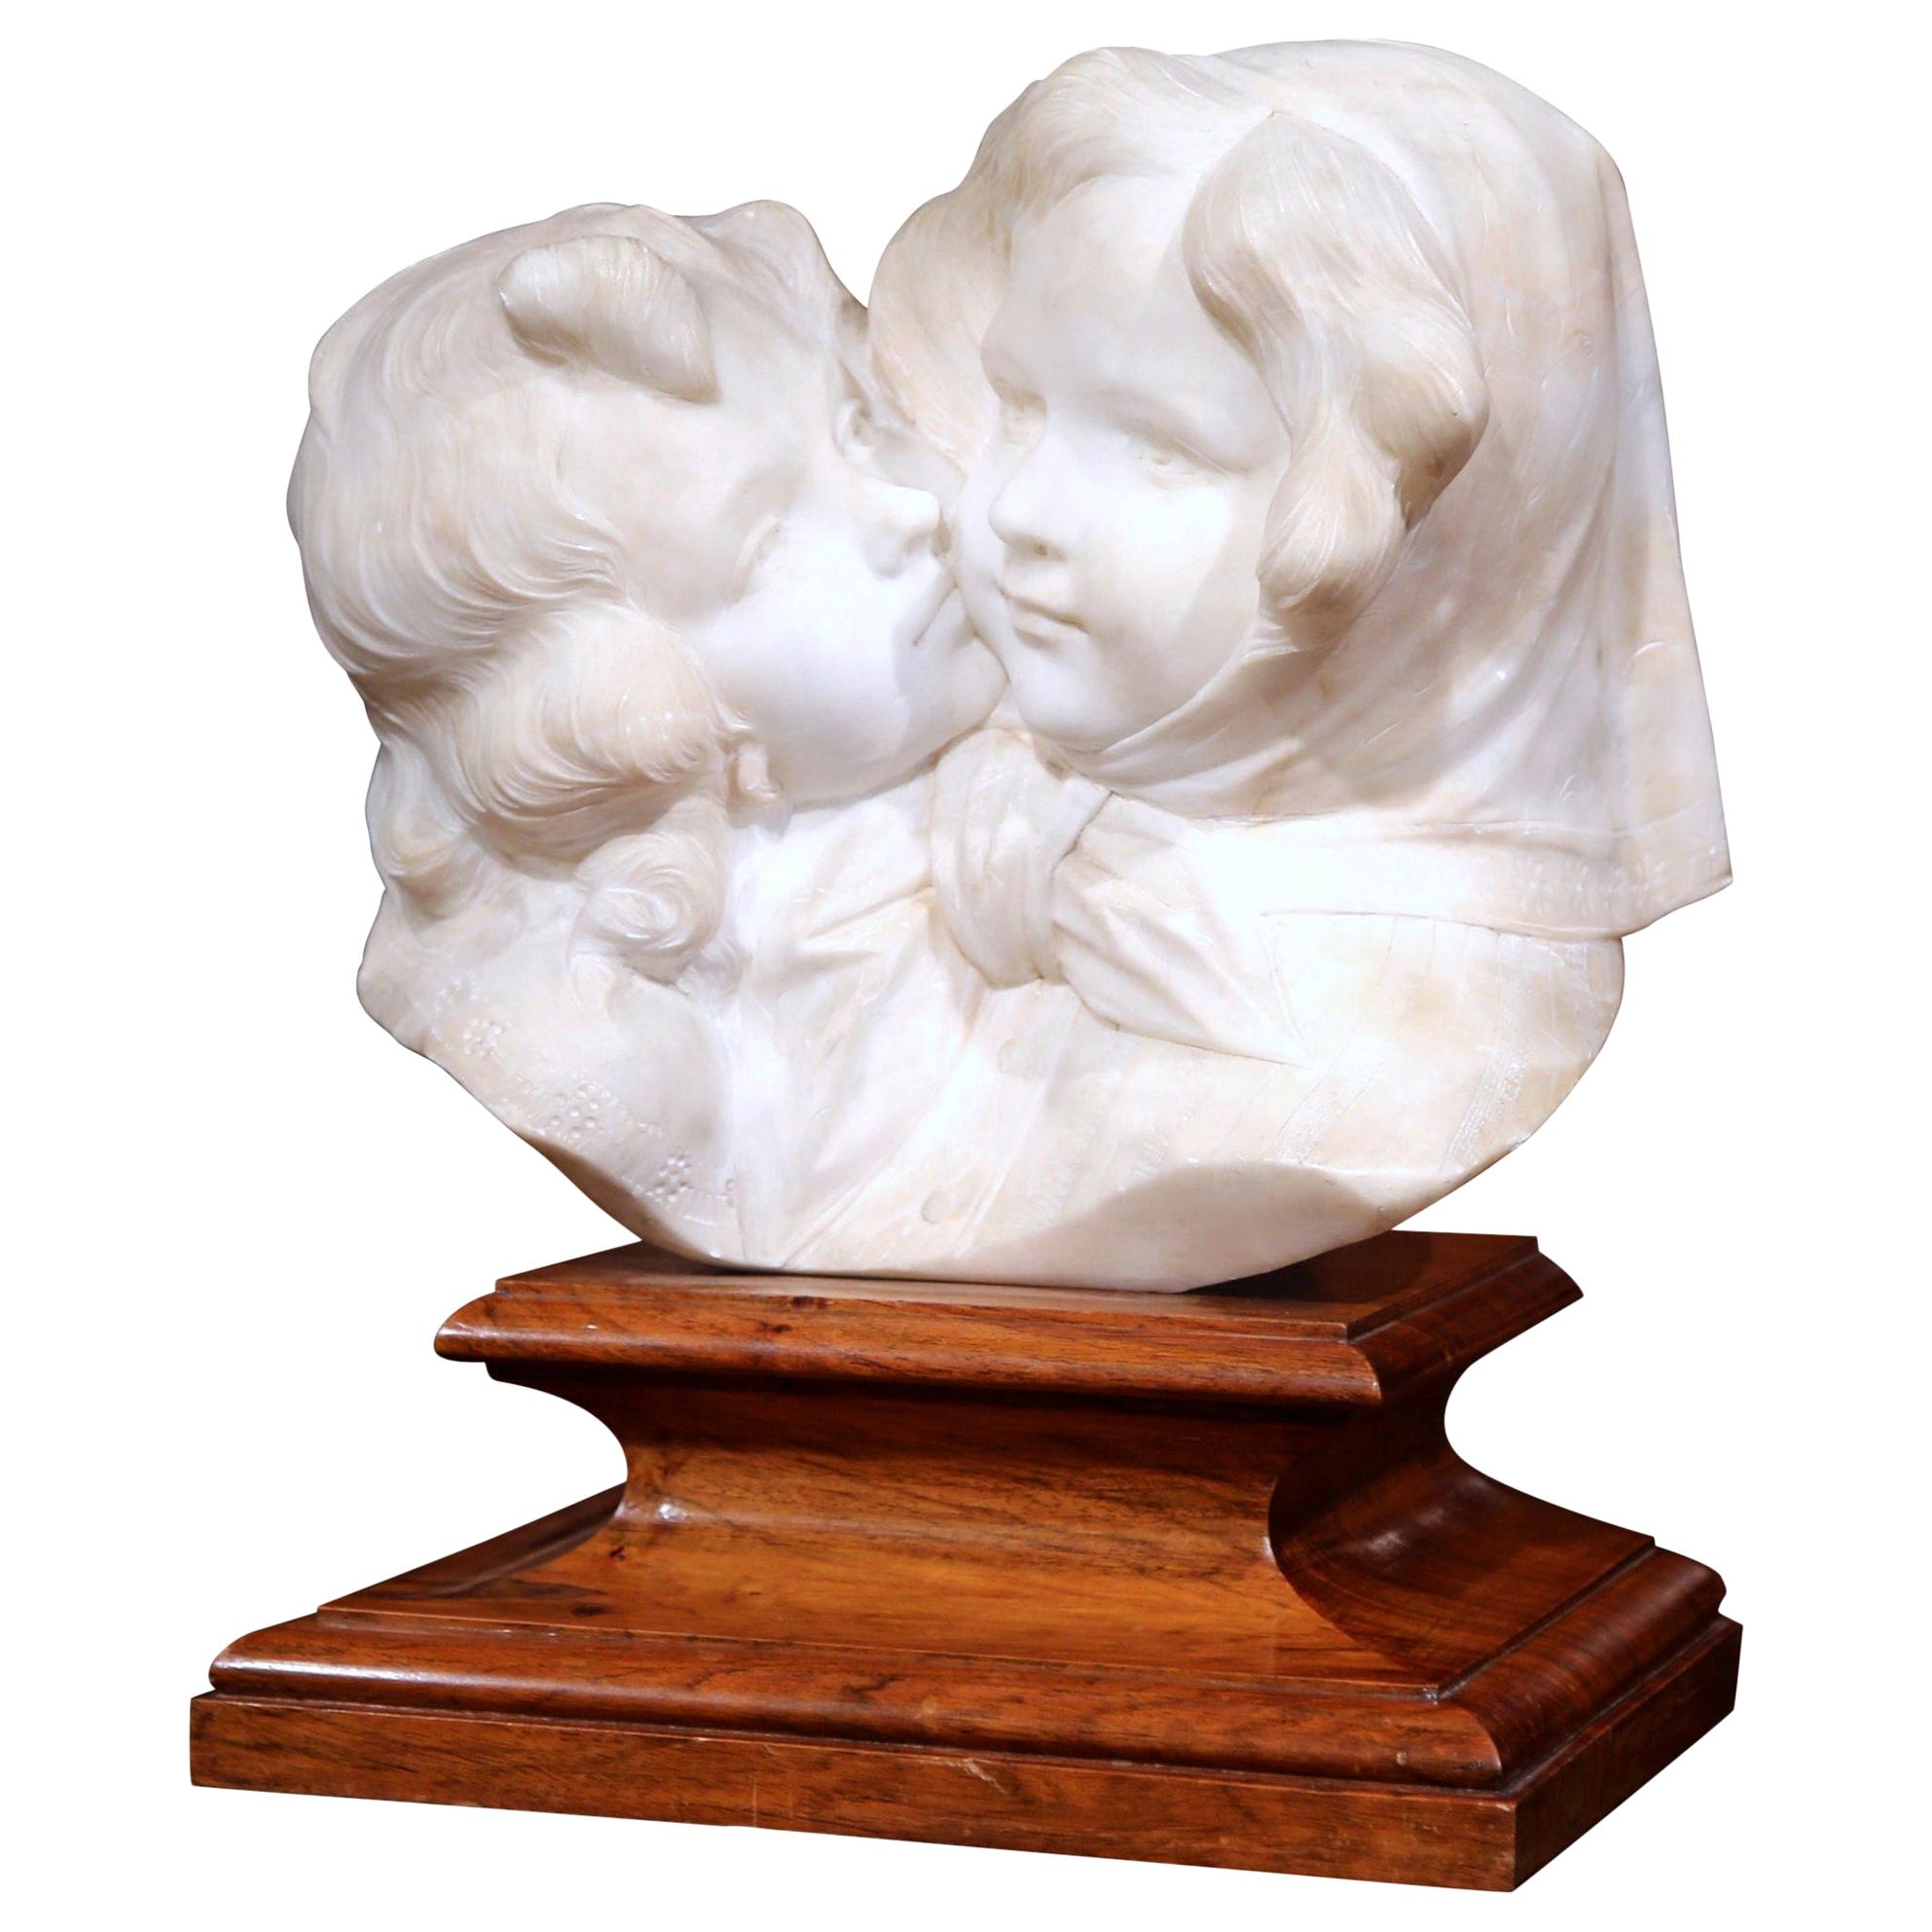 Early 20th Century Italian Carved Marble Sculpture on Wood Stand Signed A. Gory